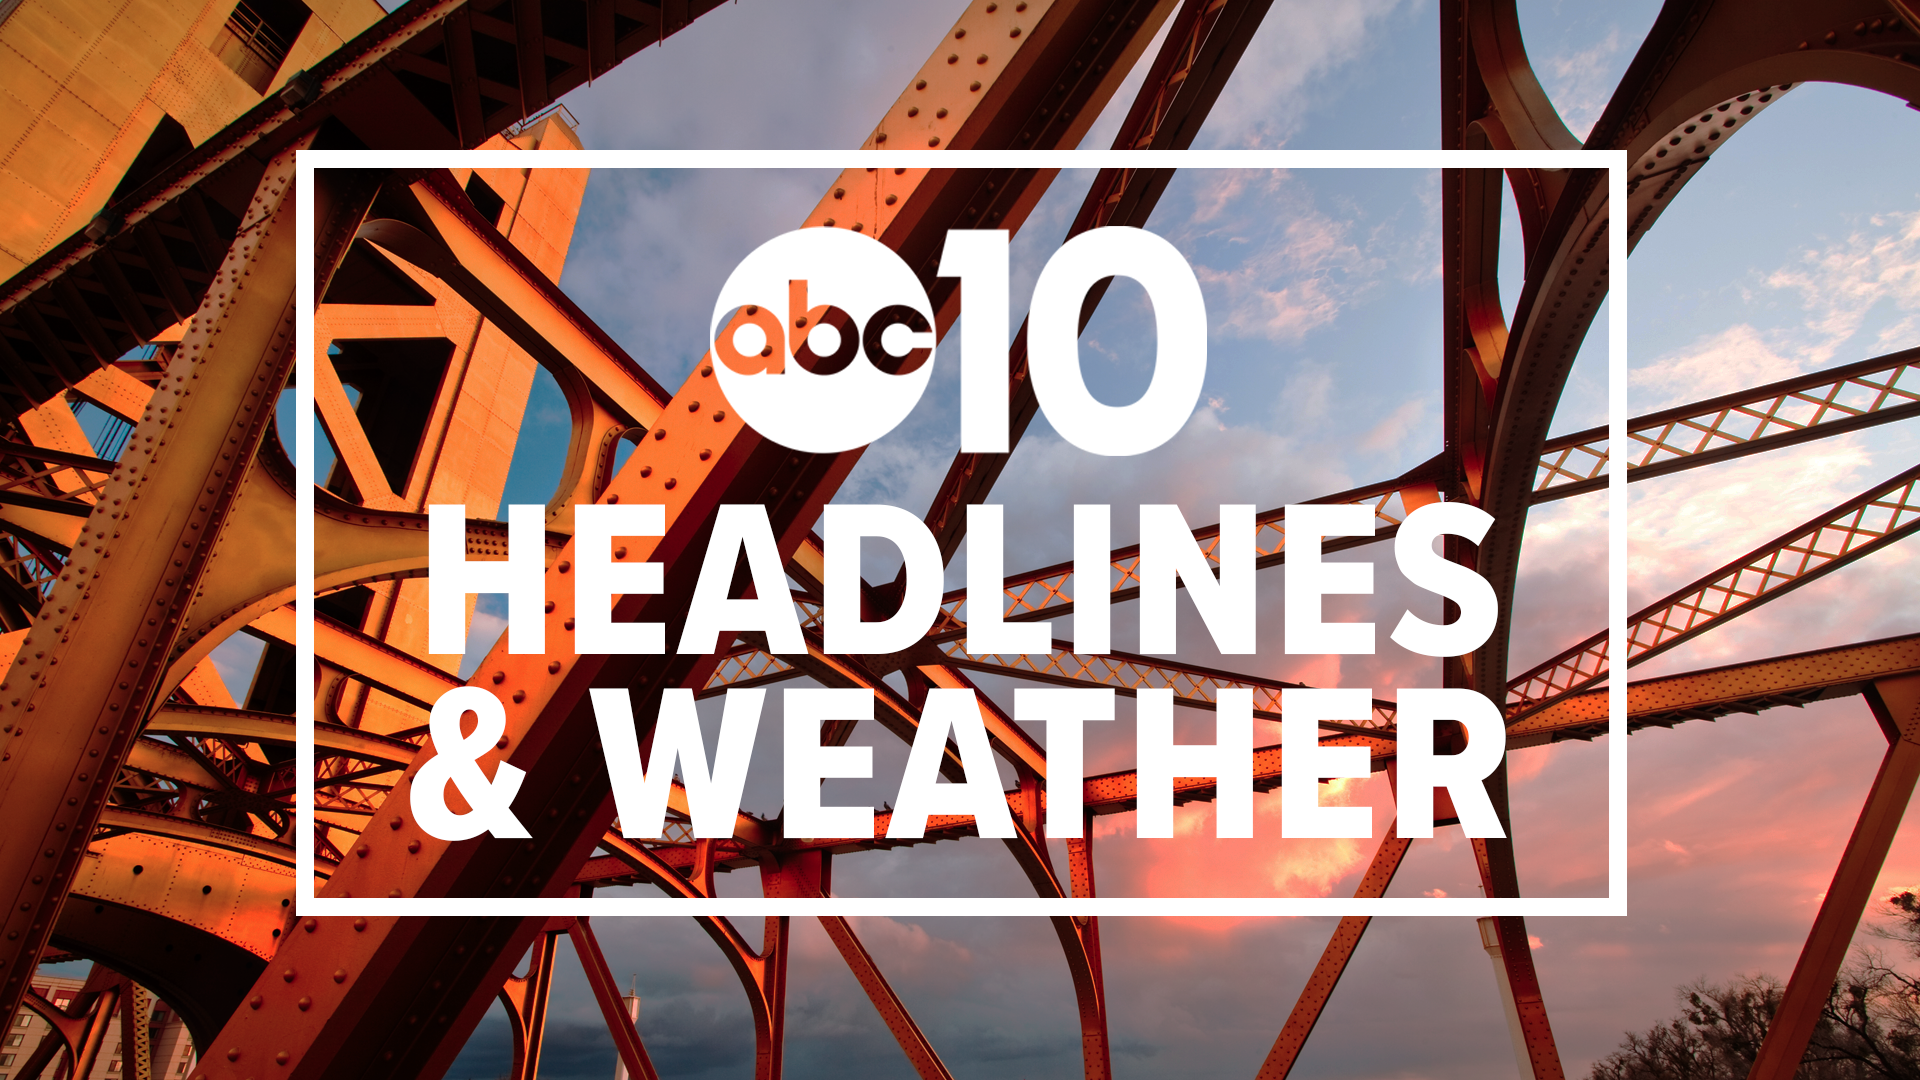 Evening Headlines: Dec. 17, 2019 | Catch in-depth reporting on #LateNewsTonight at 11 p.m. | The latest Sacramento news is always at www.abc10.com.